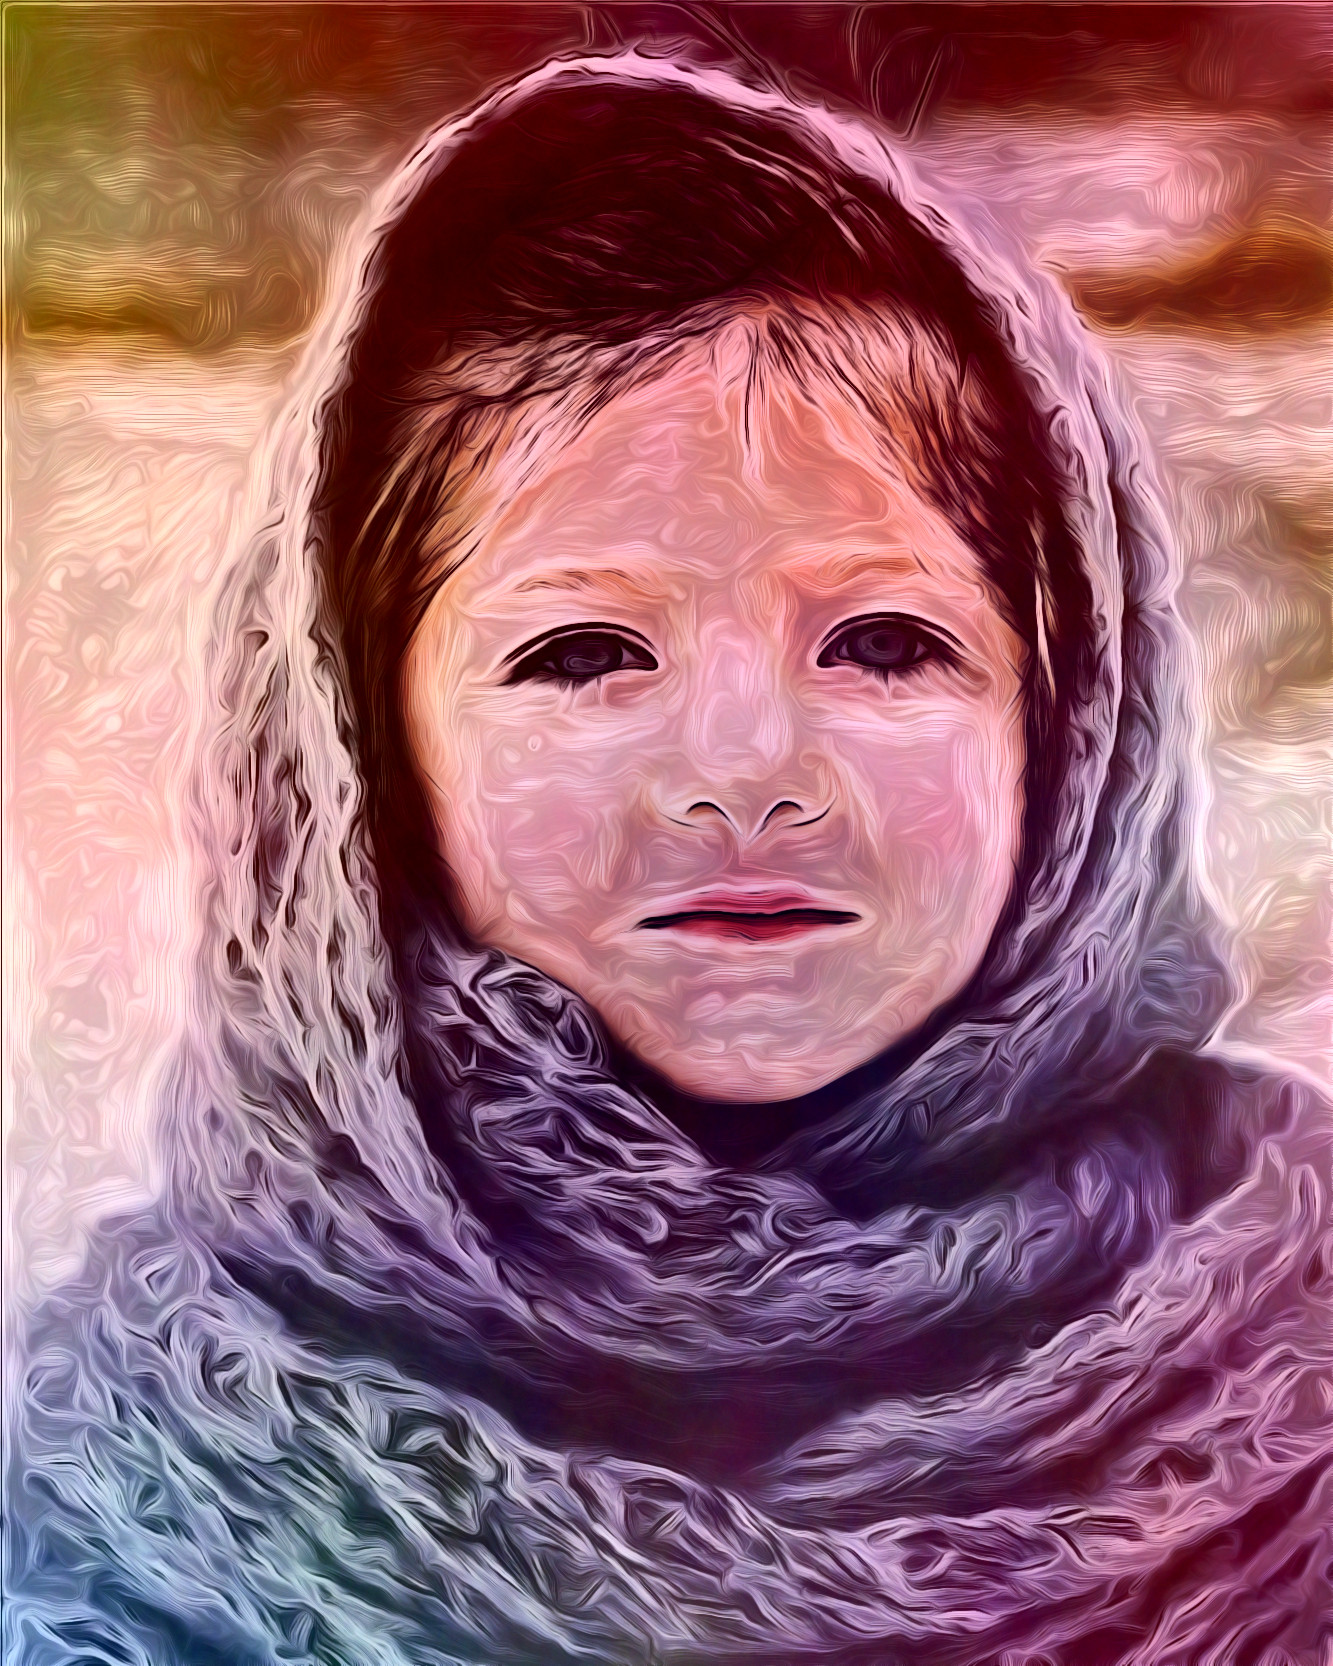 2021-05-24 07-49-27 cold-winter-girl-cute-portrait-young-835950-pxhere with JVID effect A (DreamSmooth+Barbouillage).jpg